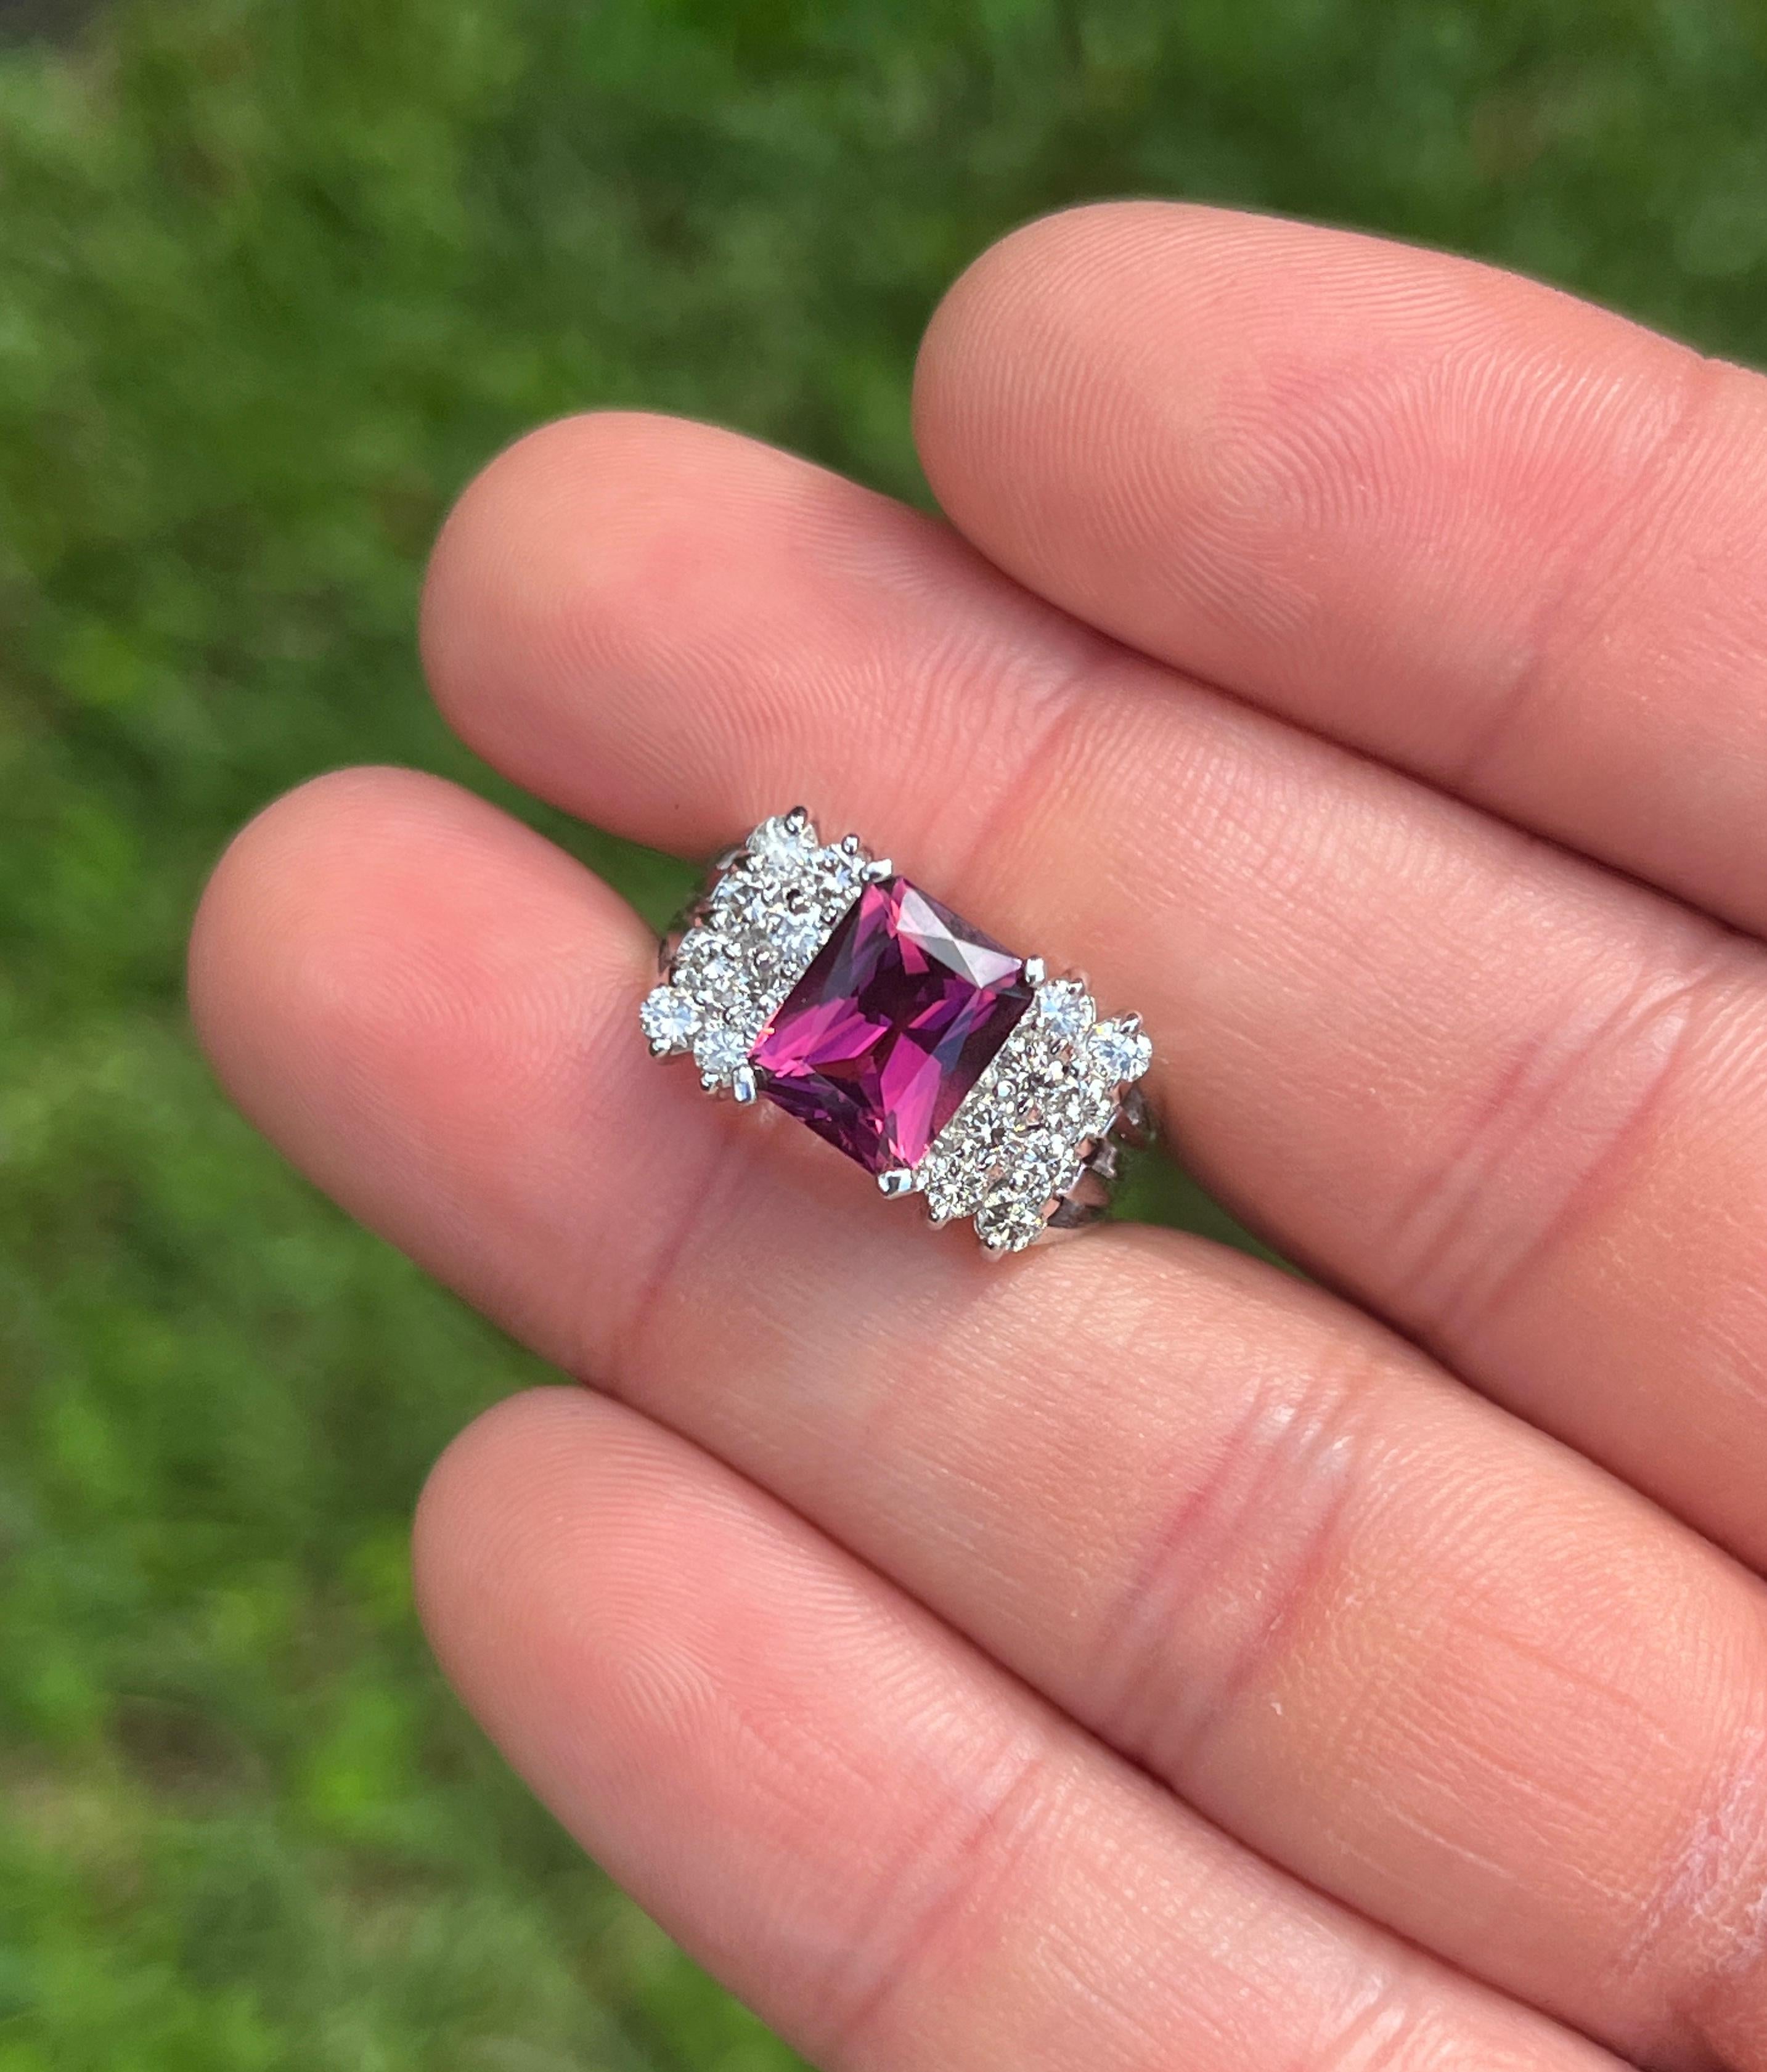 Vintage 3 Carat Radiant Cut Vivid Pinkish Purple Tourmaline Ring. Set in Platinum 950, this semi-precious gemstone ring weighs 9.6 grams and exudes the charm of a vintage era.

Flanked by a cluster of round-cut white diamonds and securely 4-prong